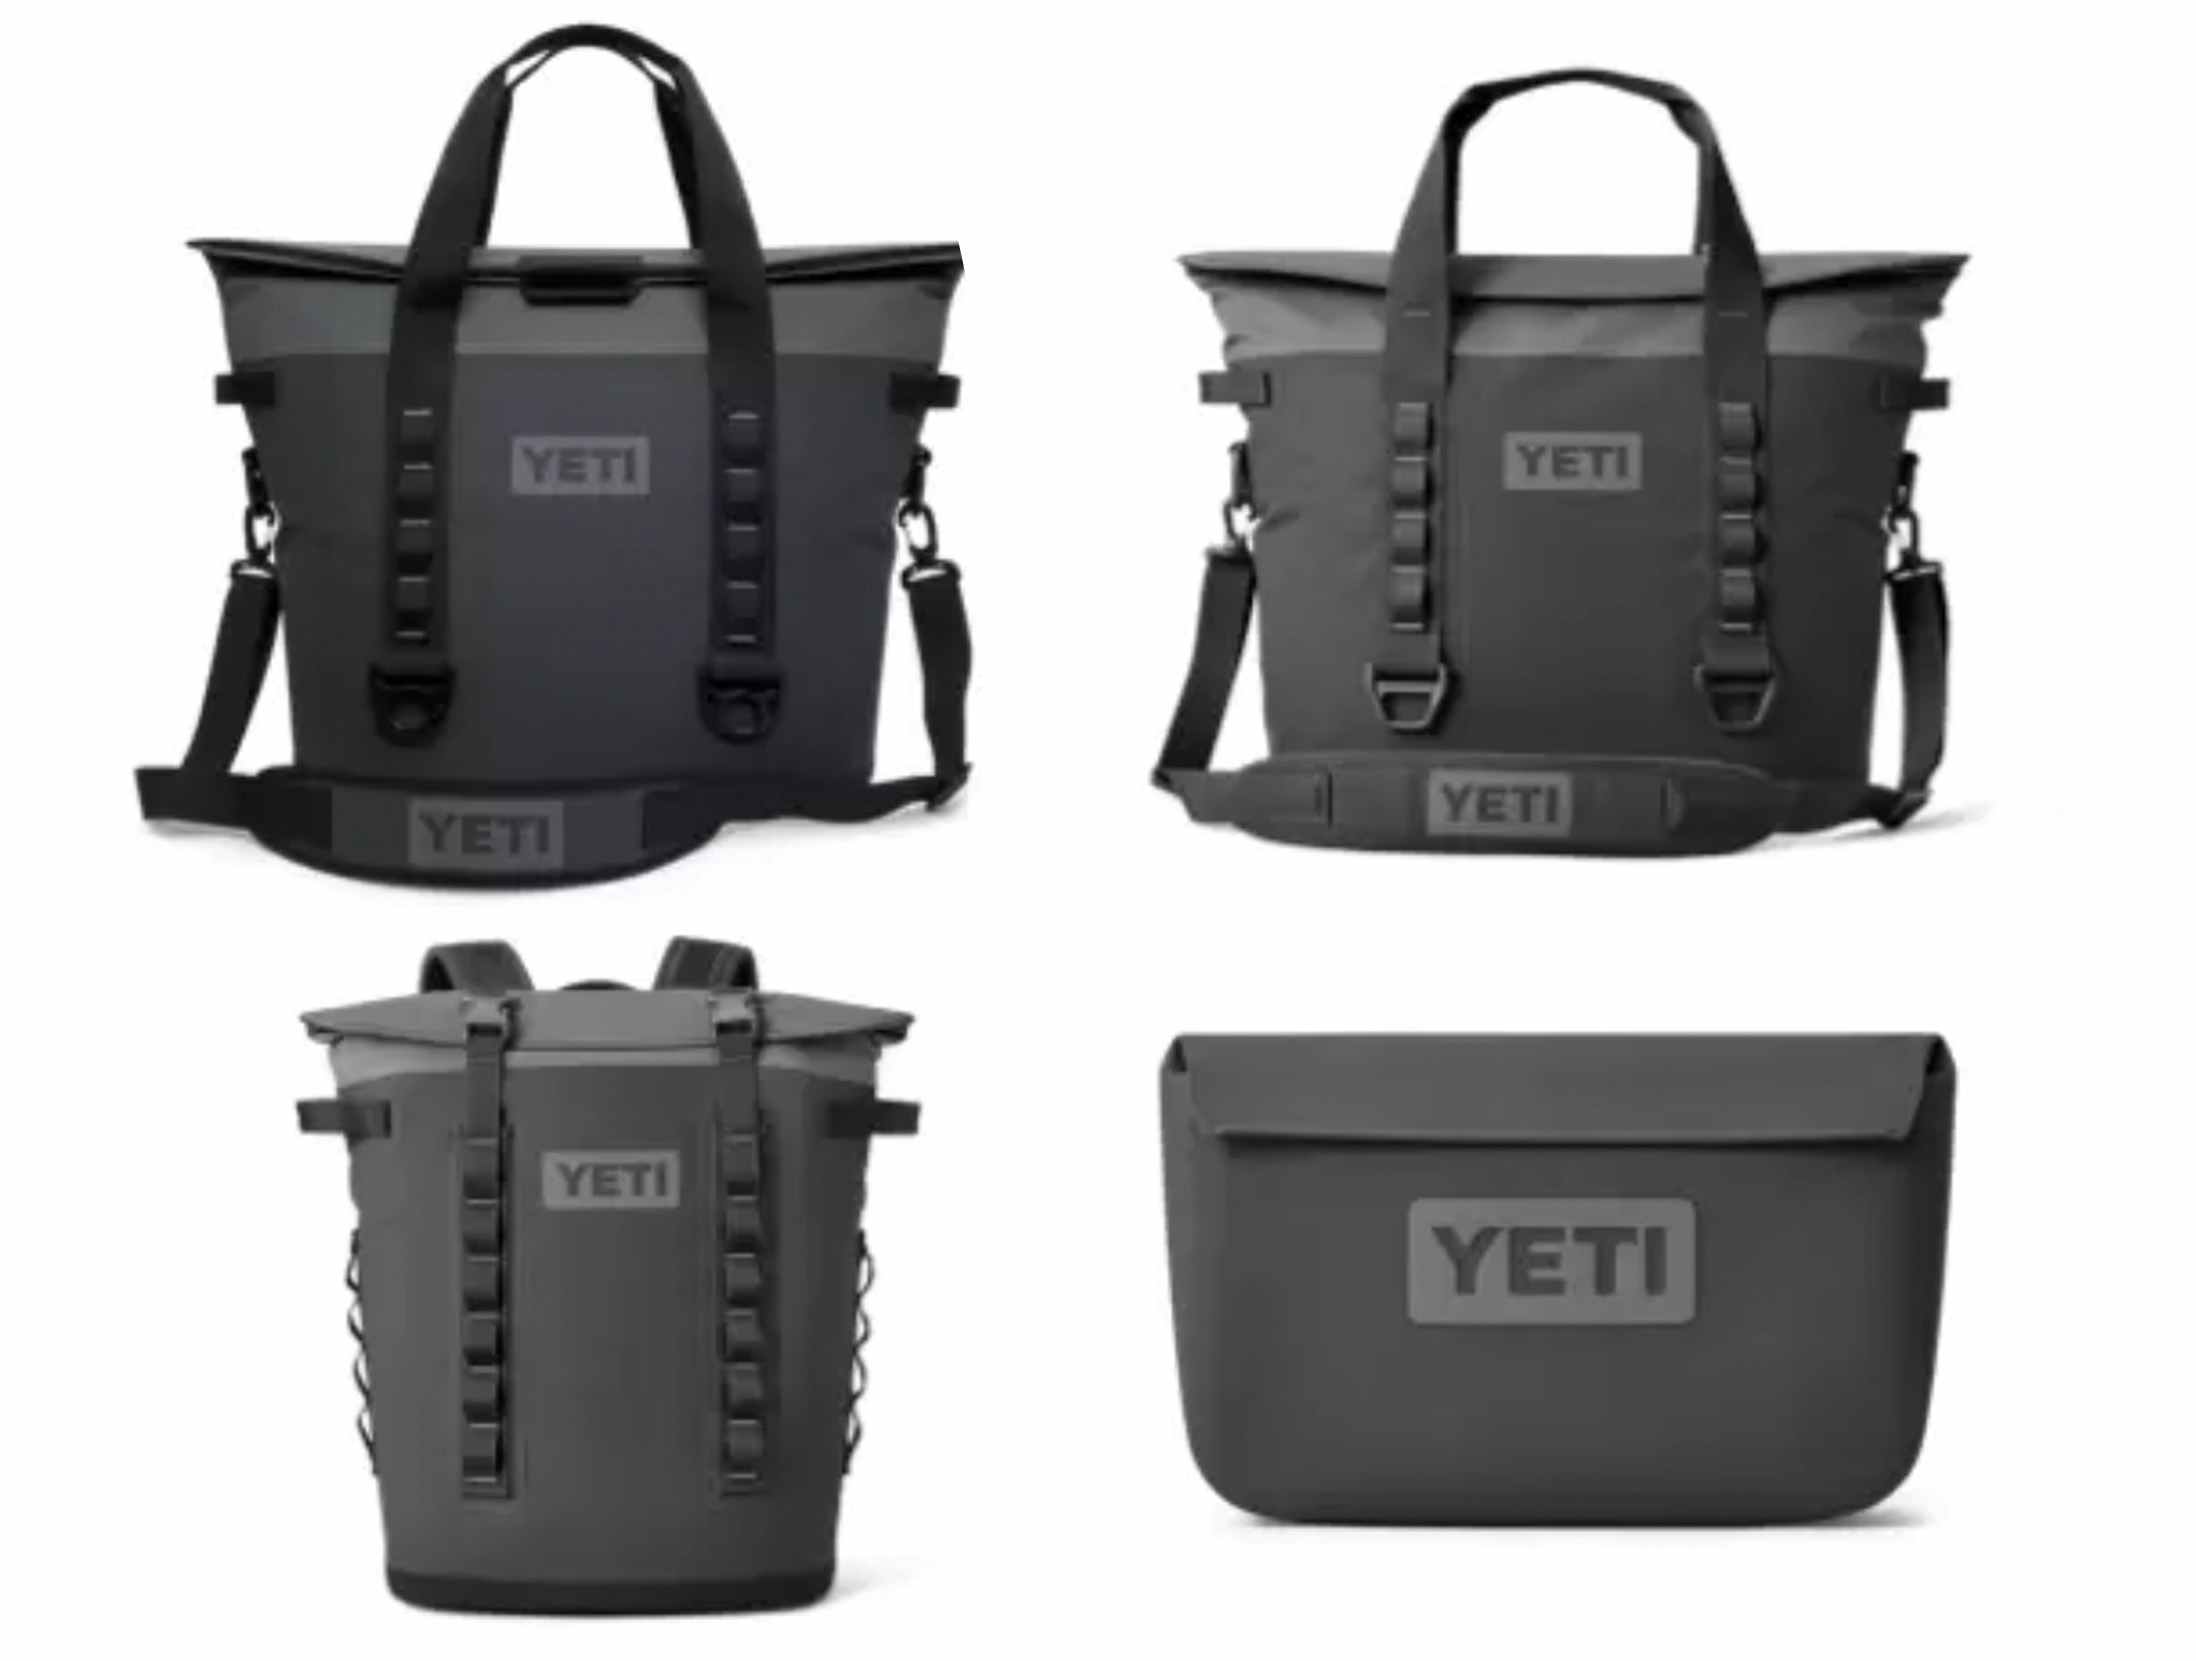 YETI Coolers For Cheap: Woot Is Offering An Epic Deal On Select YETI Coolers  - BroBible